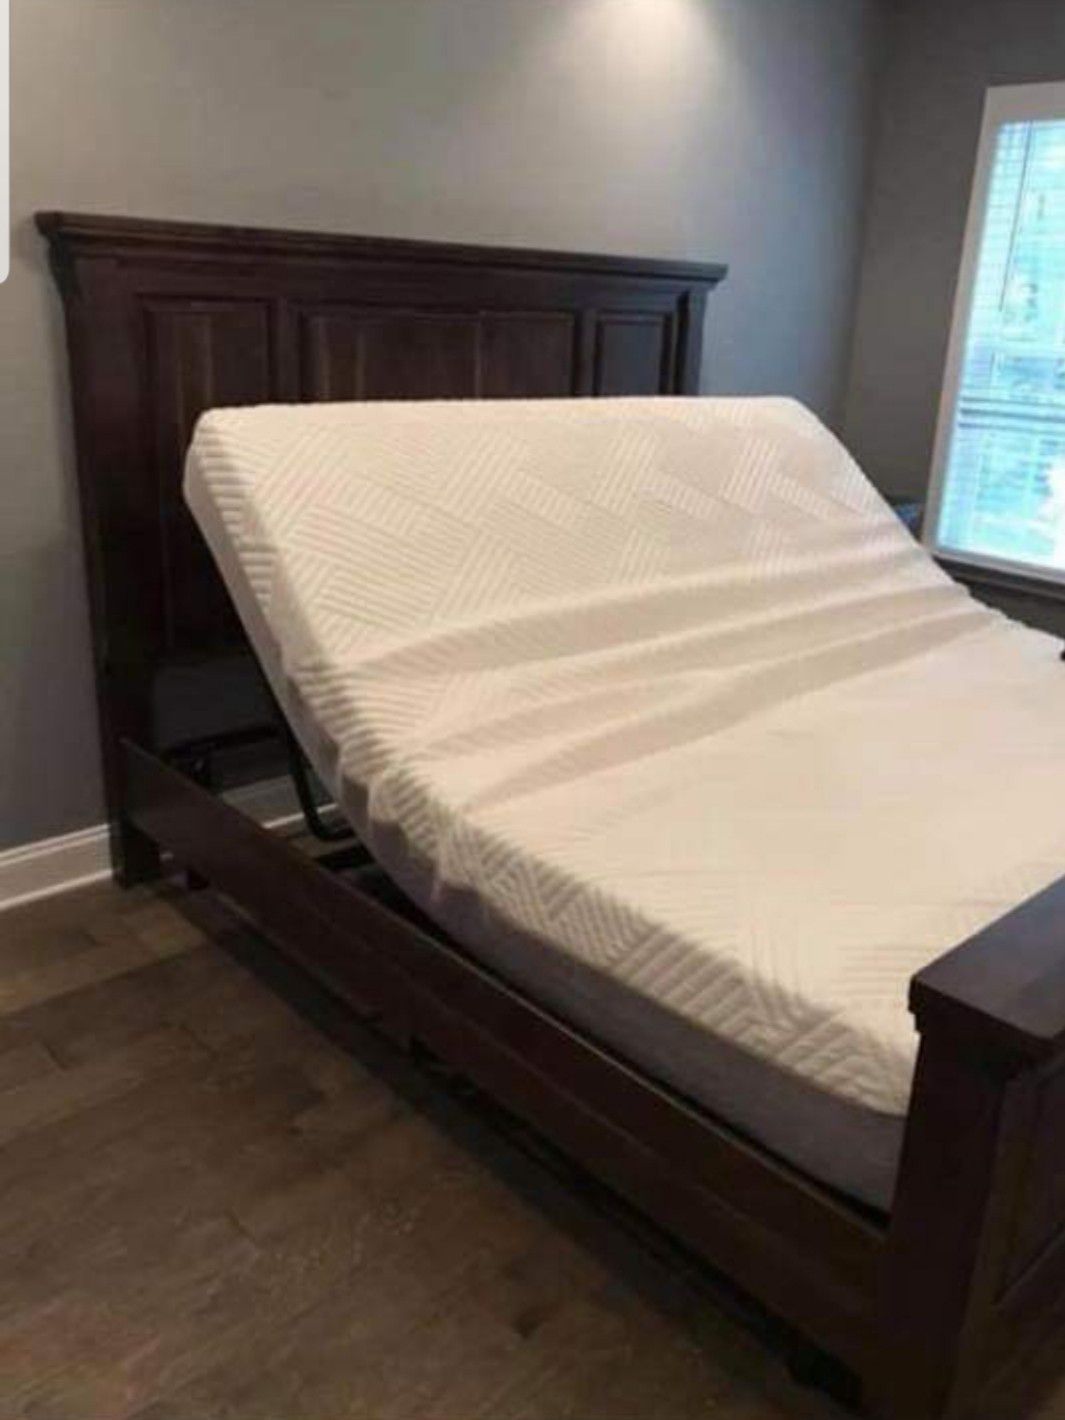 New Mattress Sets, Don't Miss Out! 40 Down